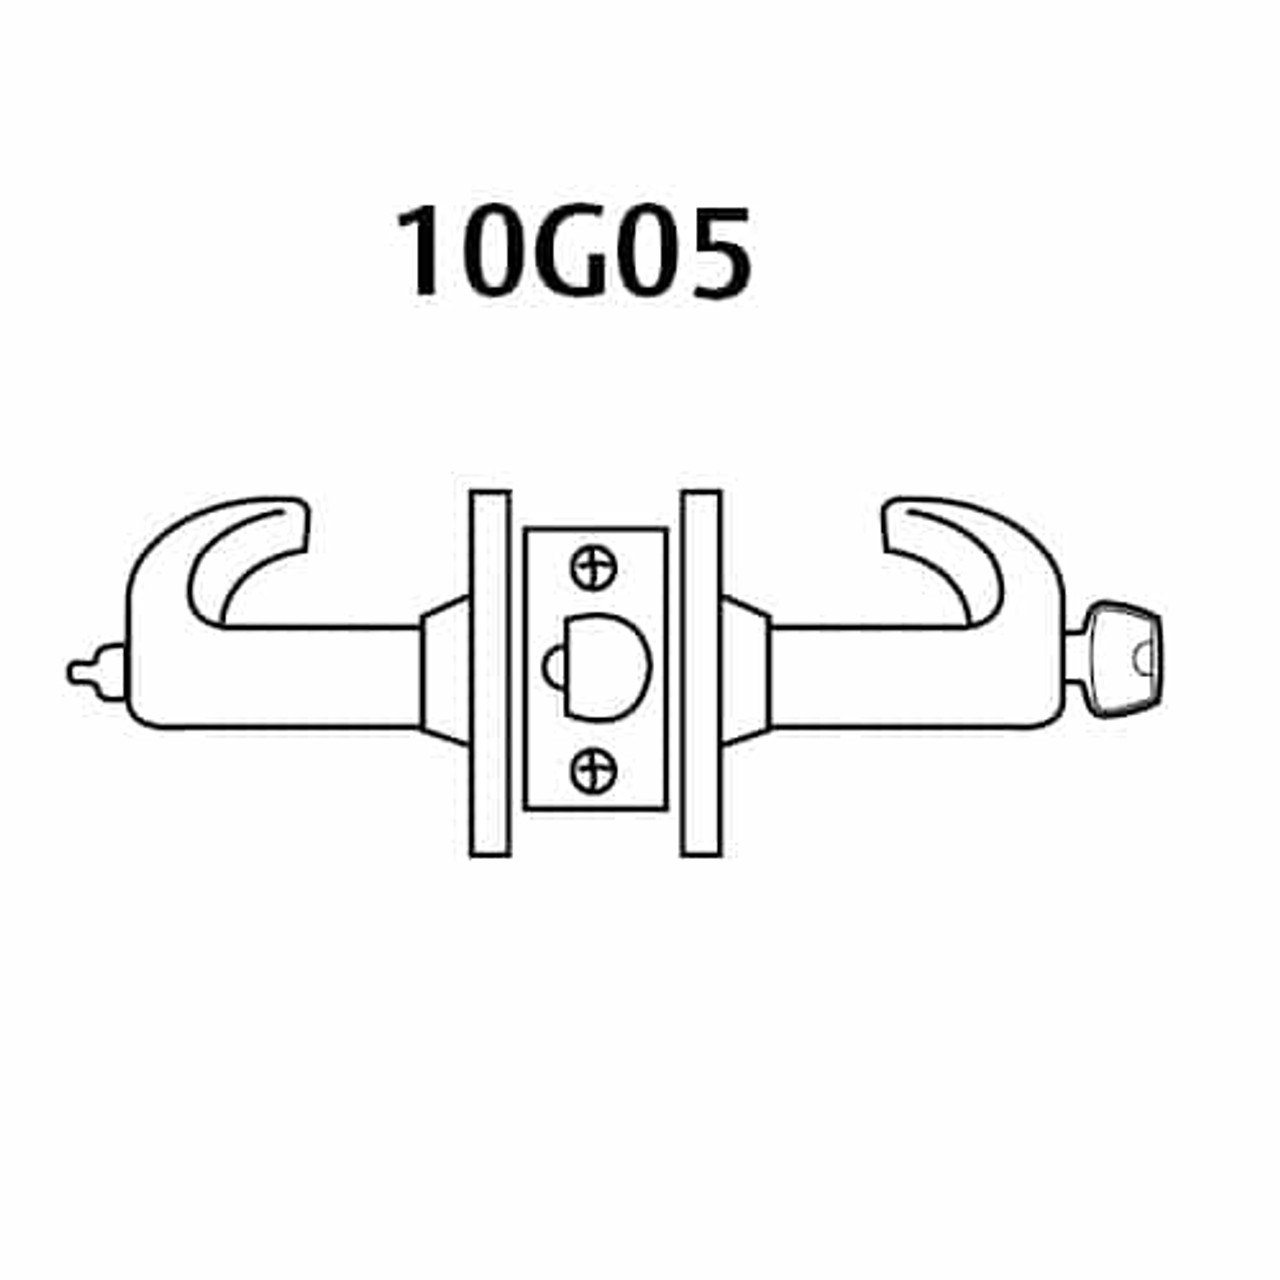 2870-10G05-LB-10B Sargent 10 Line Cylindrical Entry/Office Locks with B Lever Design and L Rose Prepped for SFIC in Oxidized Dull Bronze